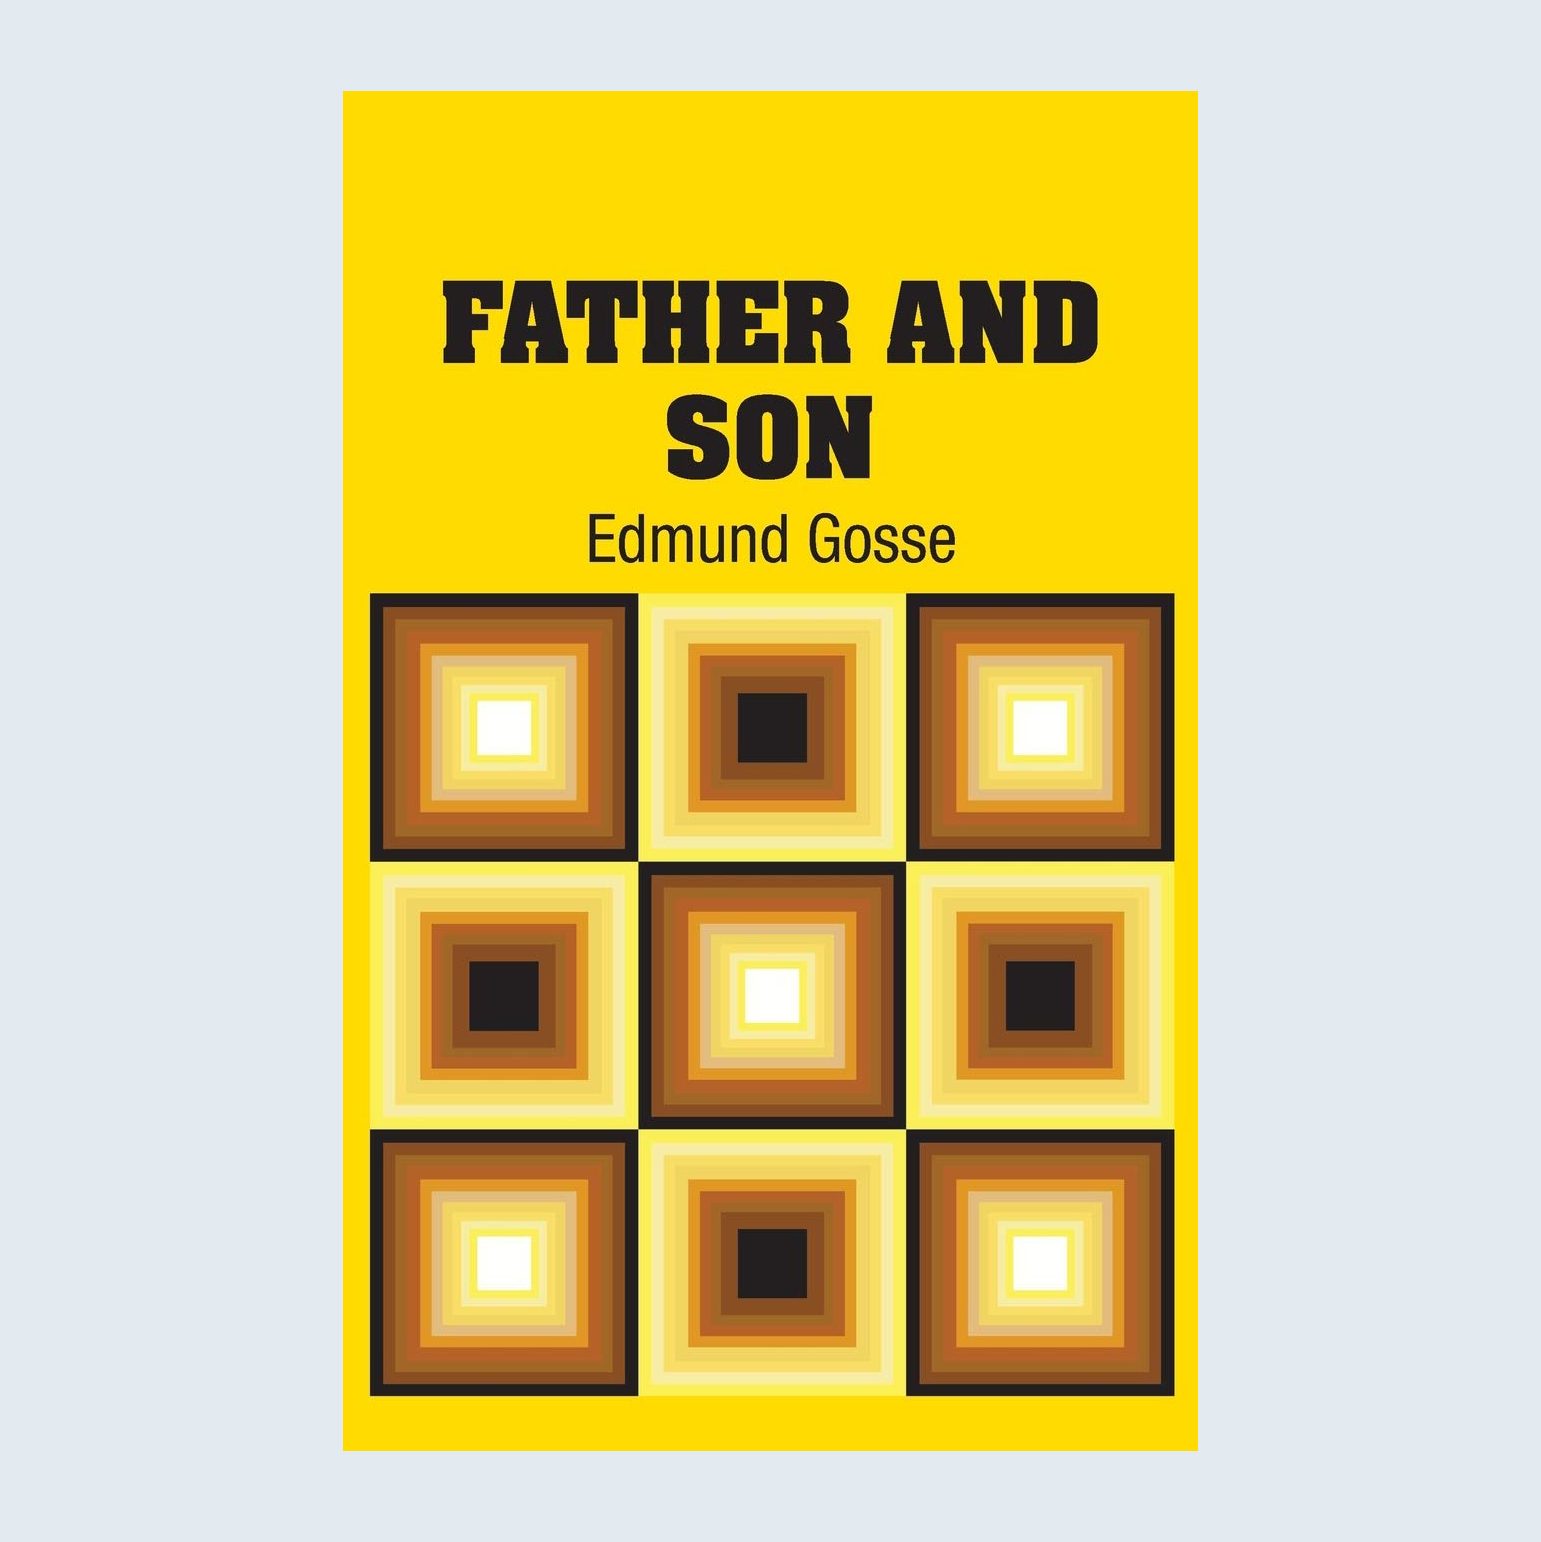 Father and Son by Edmund Gosse, book for Fathers day